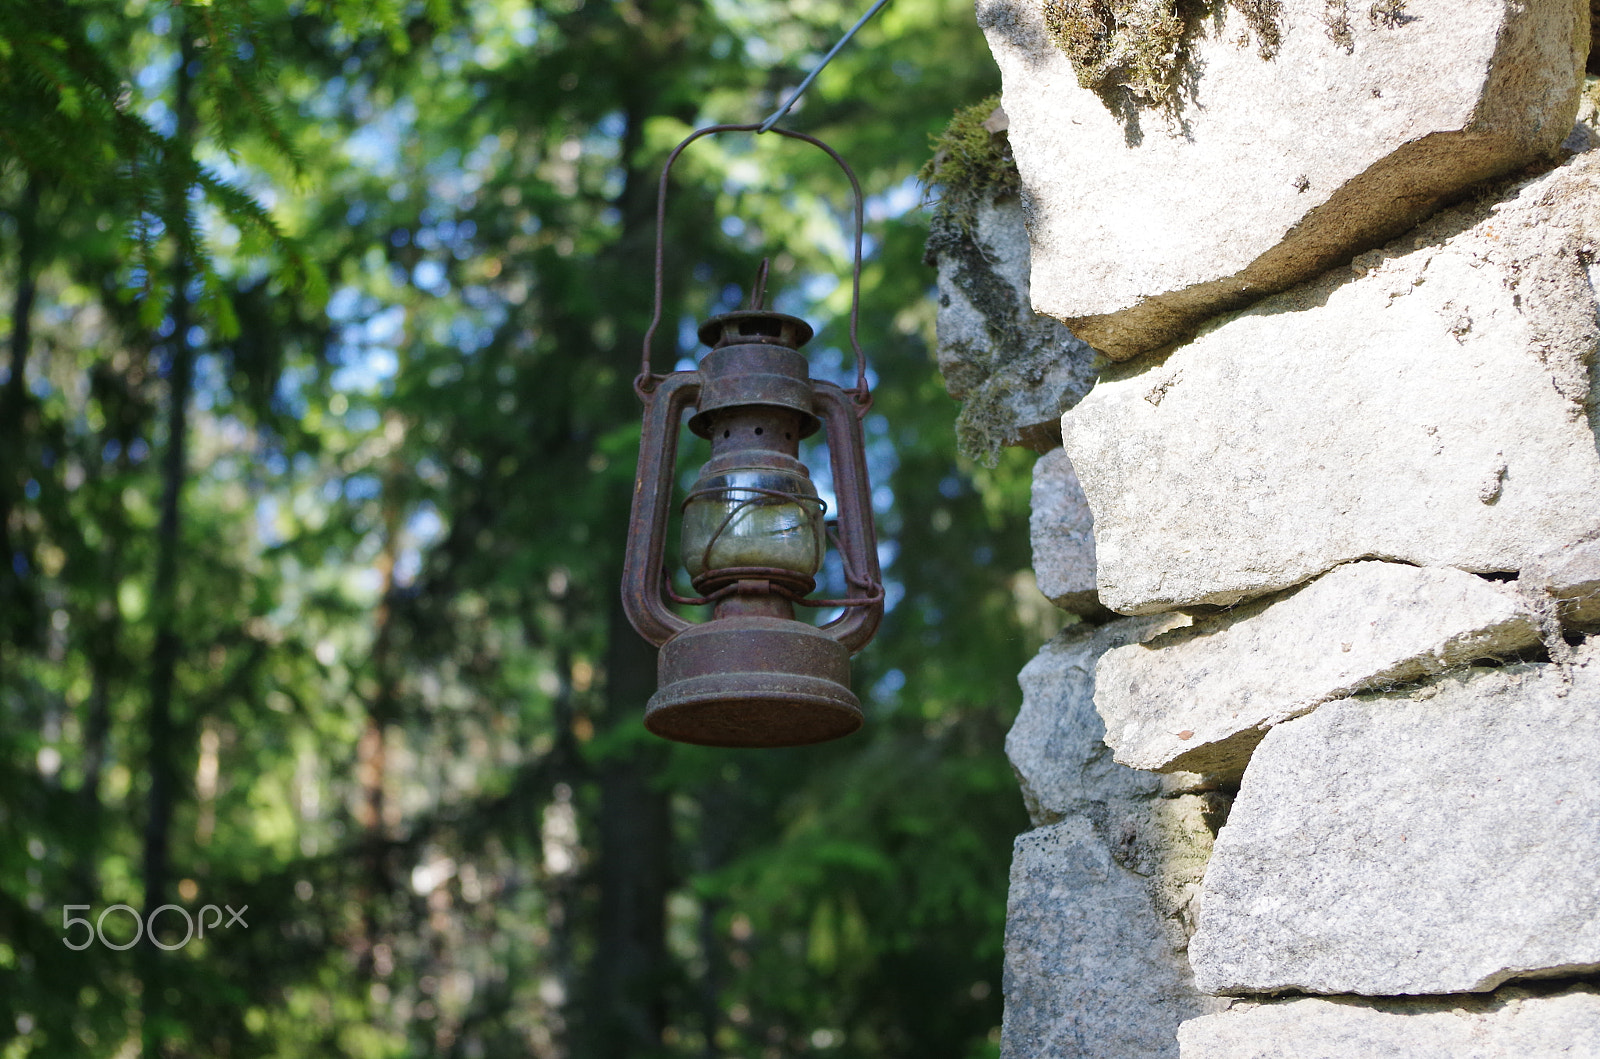 Pentax K-500 sample photo. An old lantern on an old stone house in a forest photography